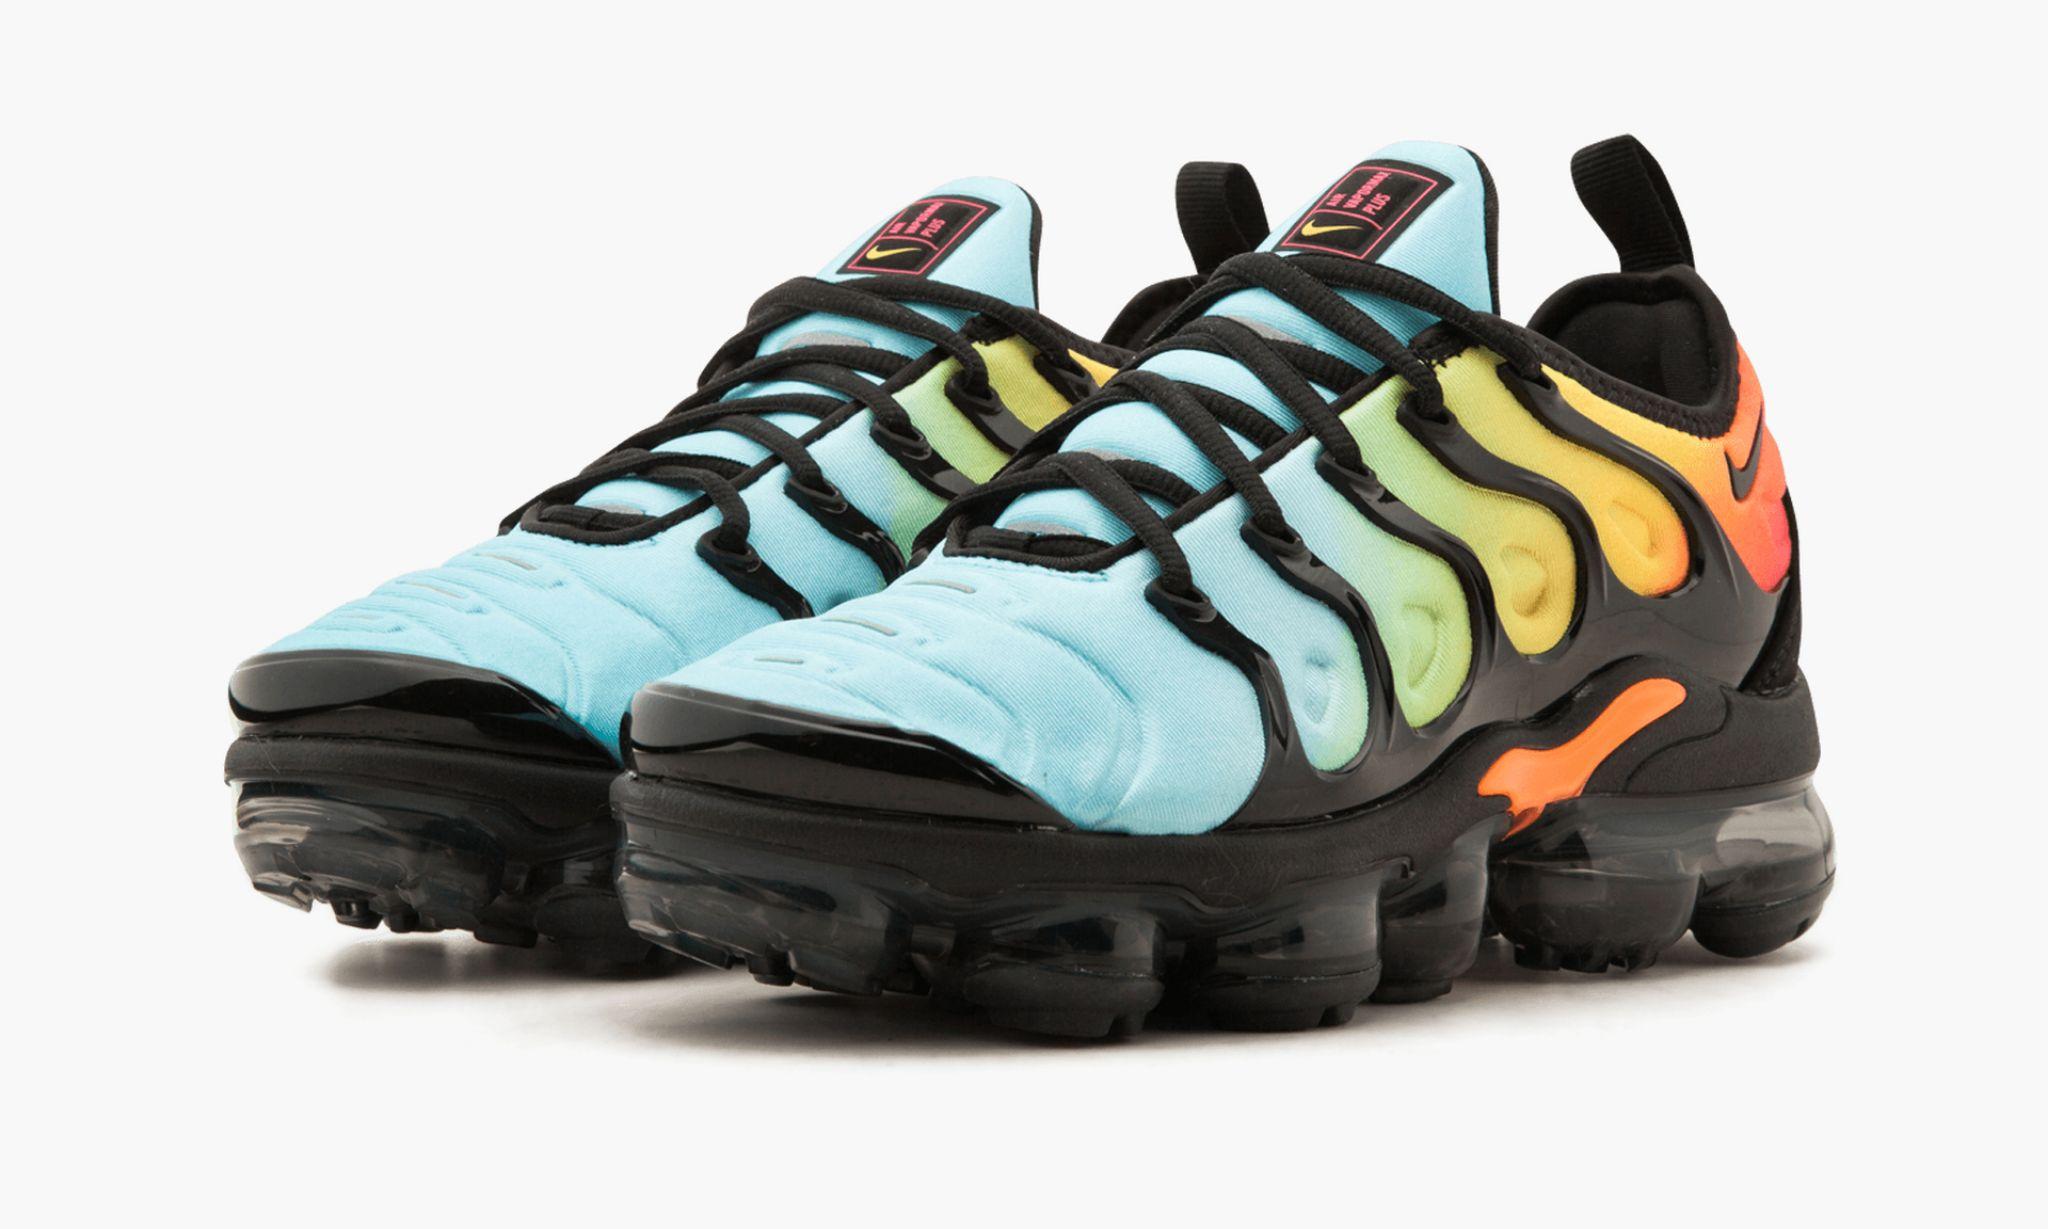 Nike Air Vapormax Plus "tropical Sunset" Shoes in Black | Lyst